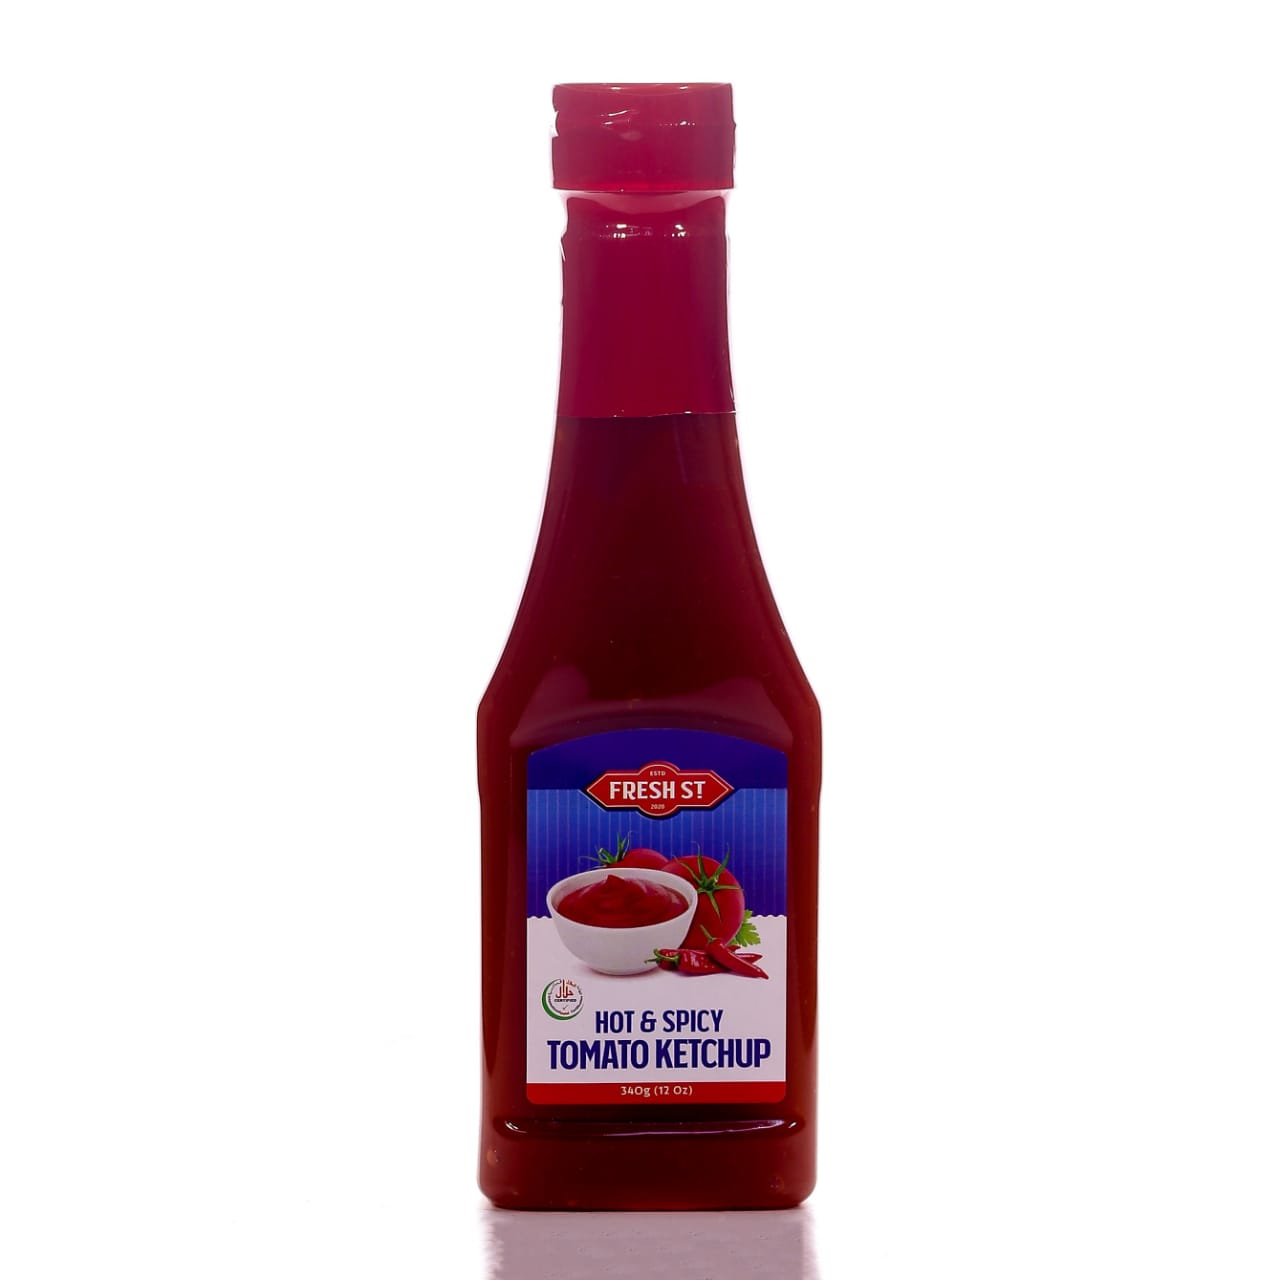 FRESH ST HOT & SPICY TOMATO KETCHUP 340GM